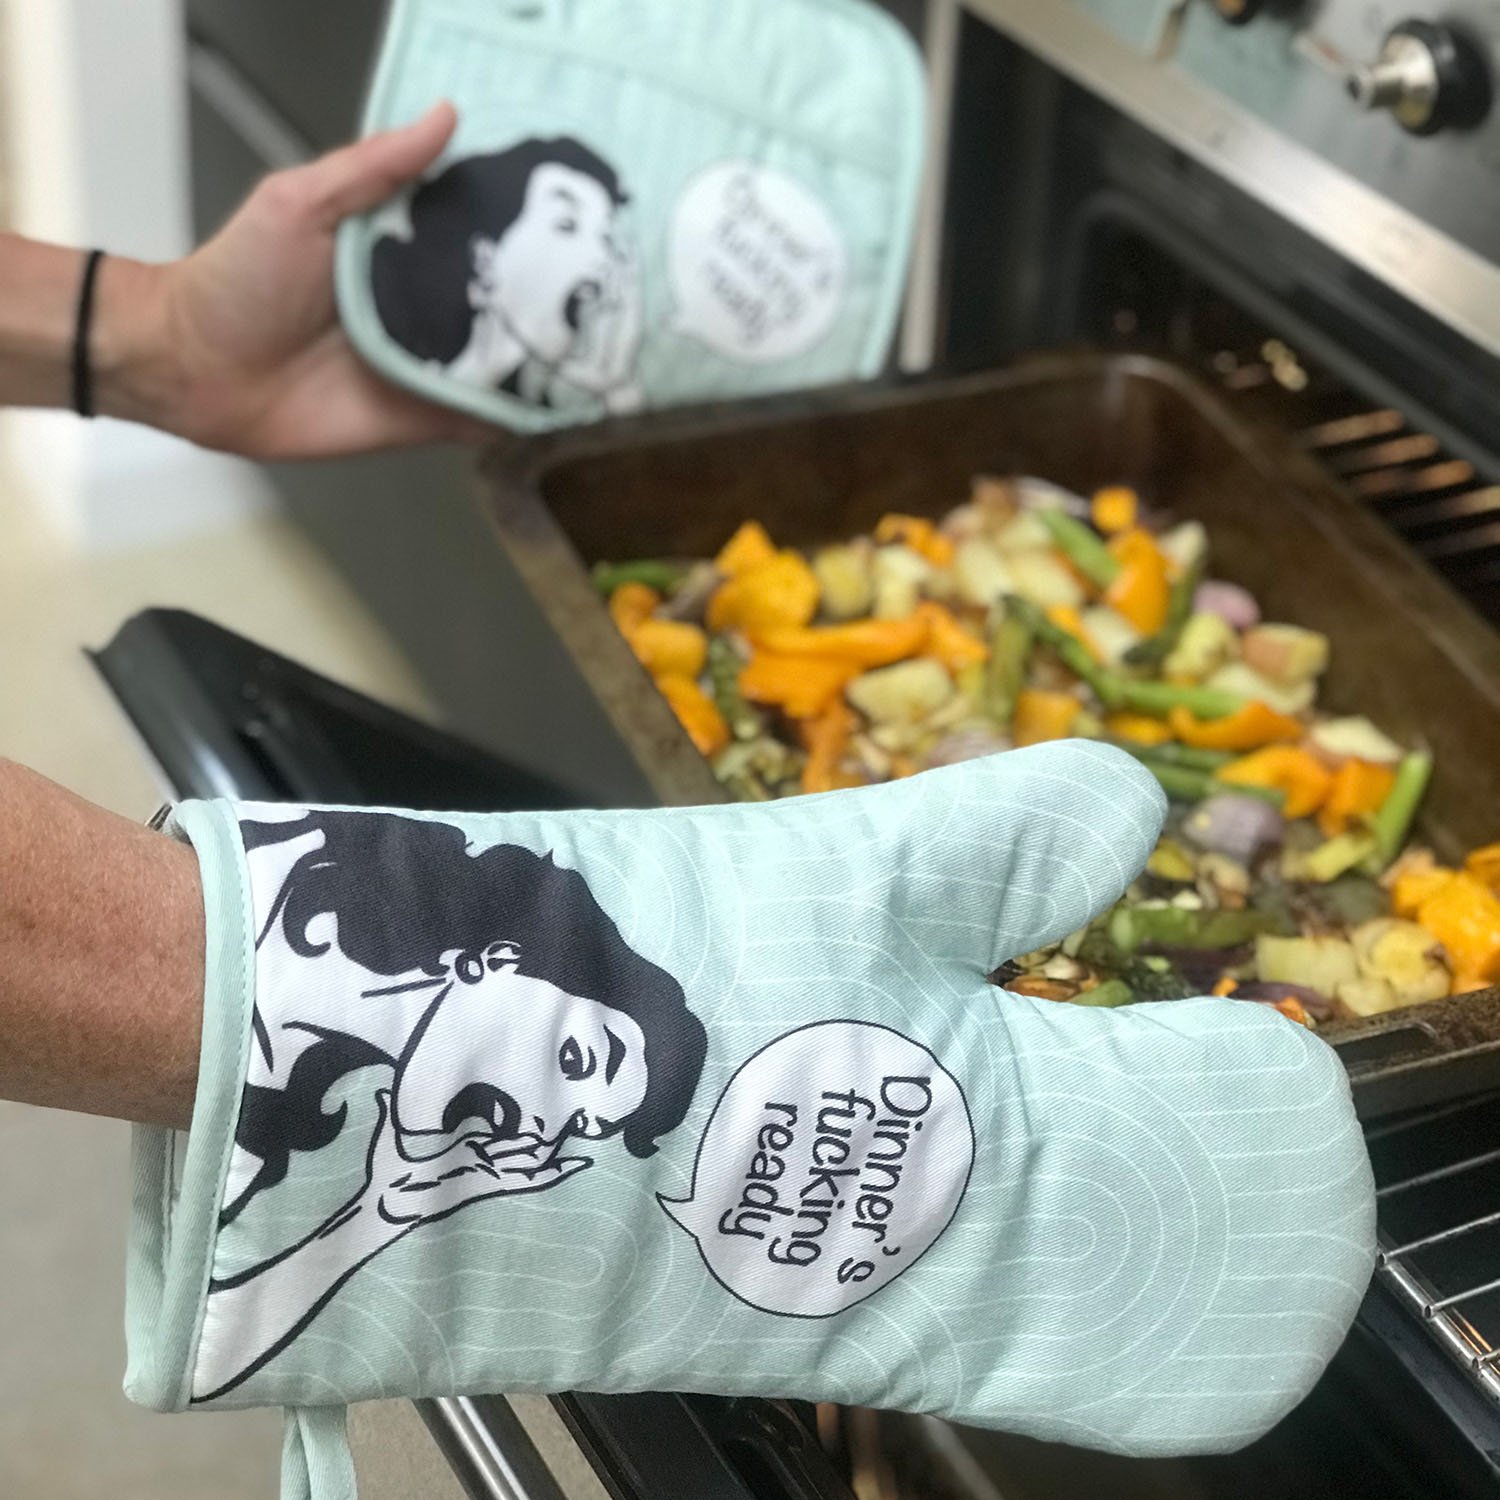 Mr.Good Lookin' is Cookin'，Oven Mitts and Pot Holders Sets of 2，Funny Oven  Mitt，Birthday Gifts for Men,Great Birthday Gifts for Dad Boyfriend